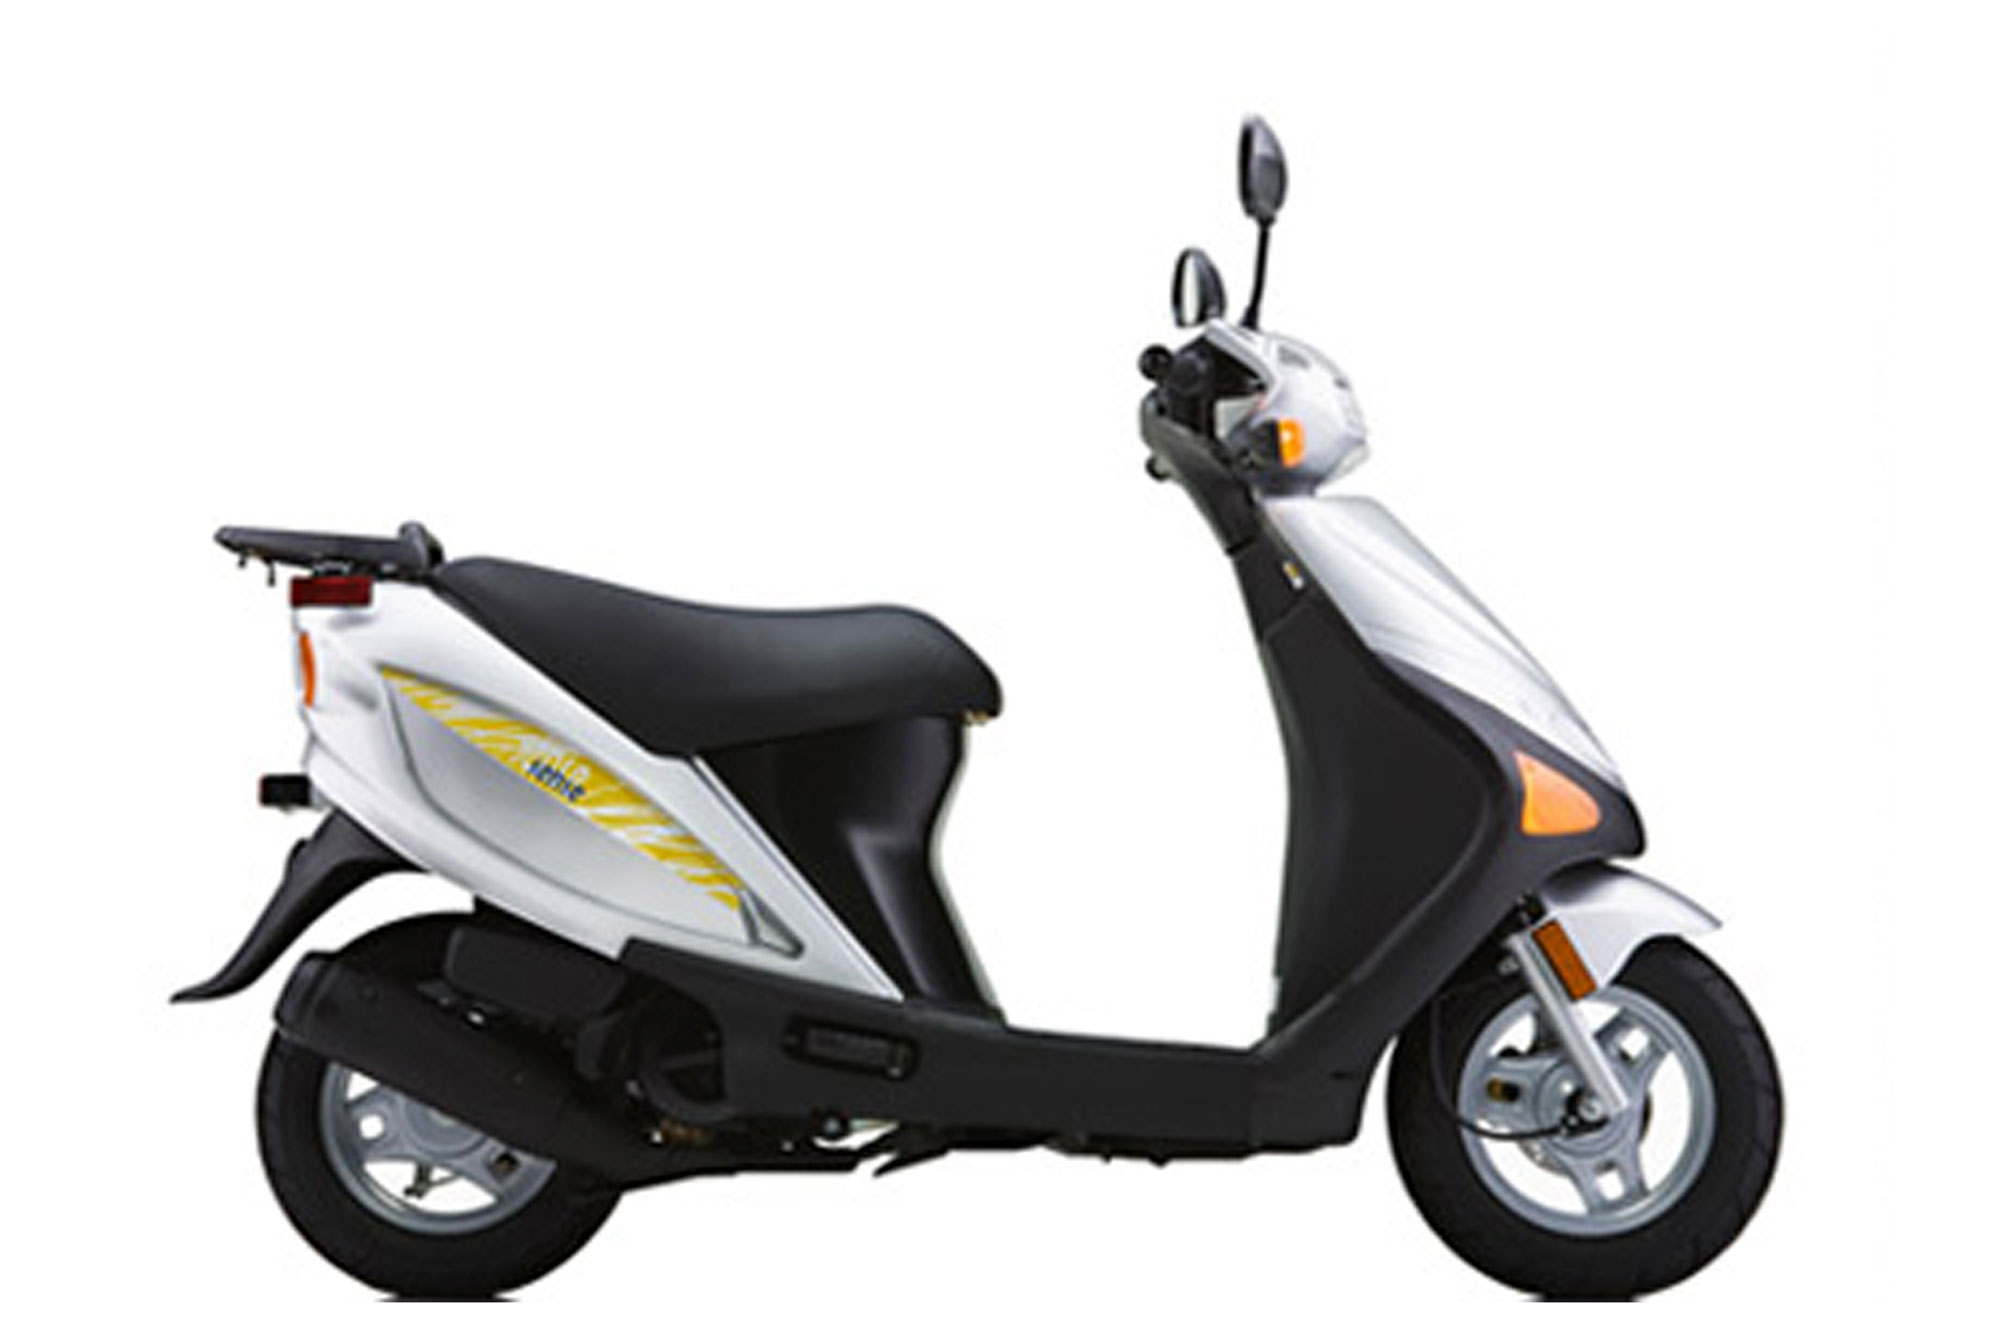 Grey scooter with one seat available for rent at AM Scooter Rentals Key West